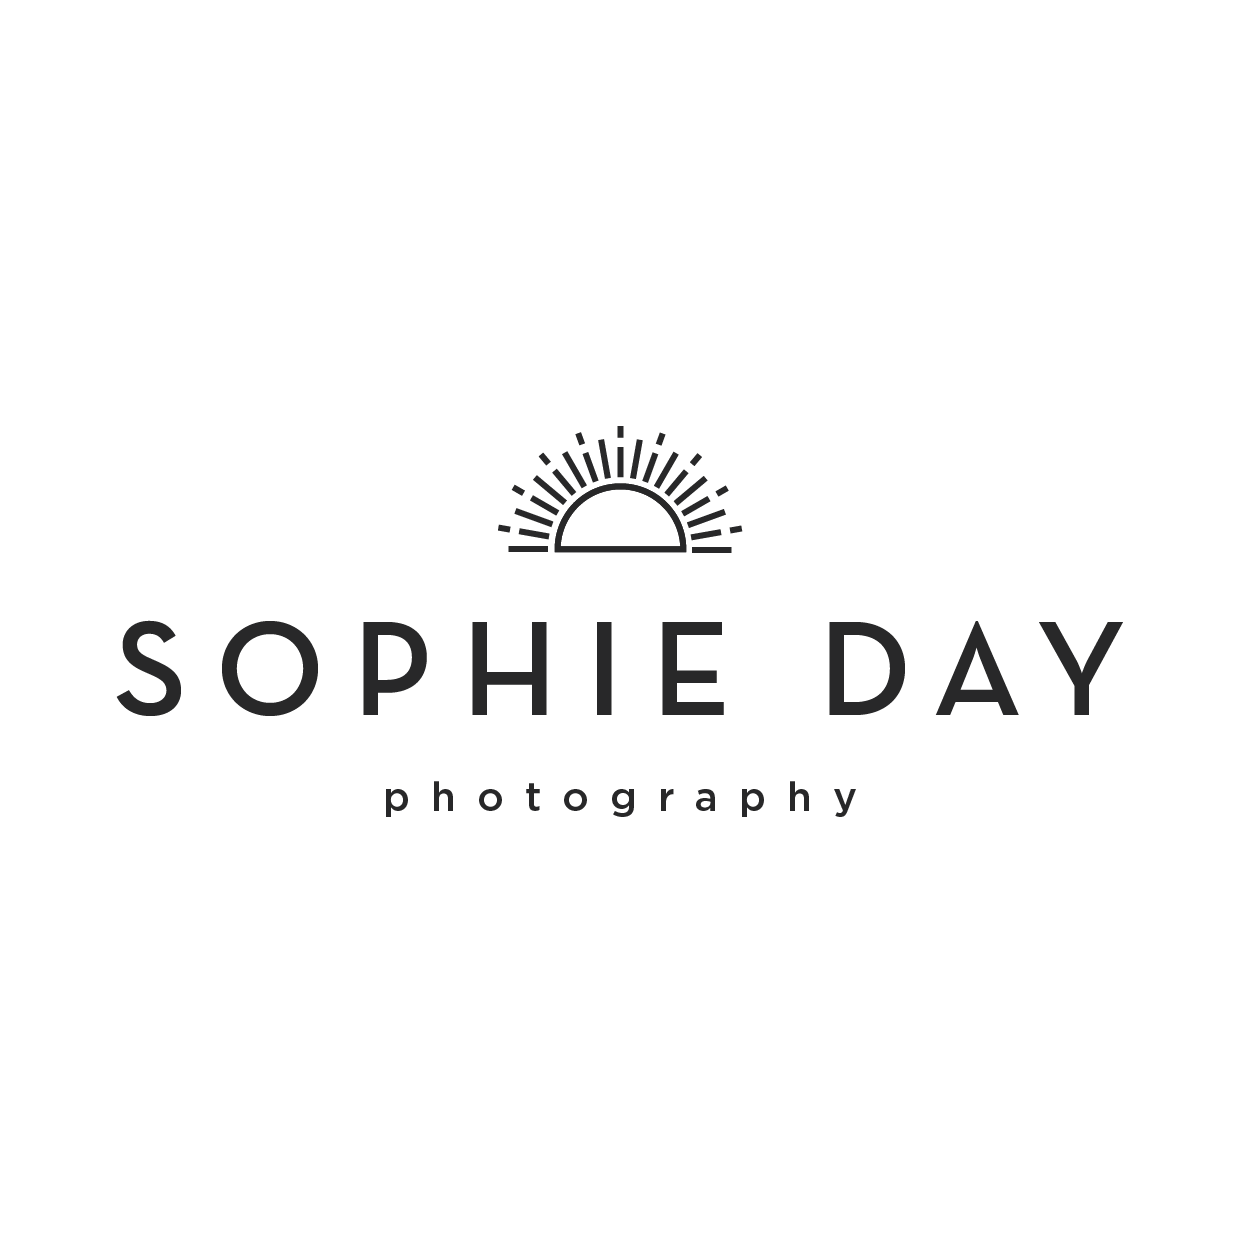 Sophie Day photography